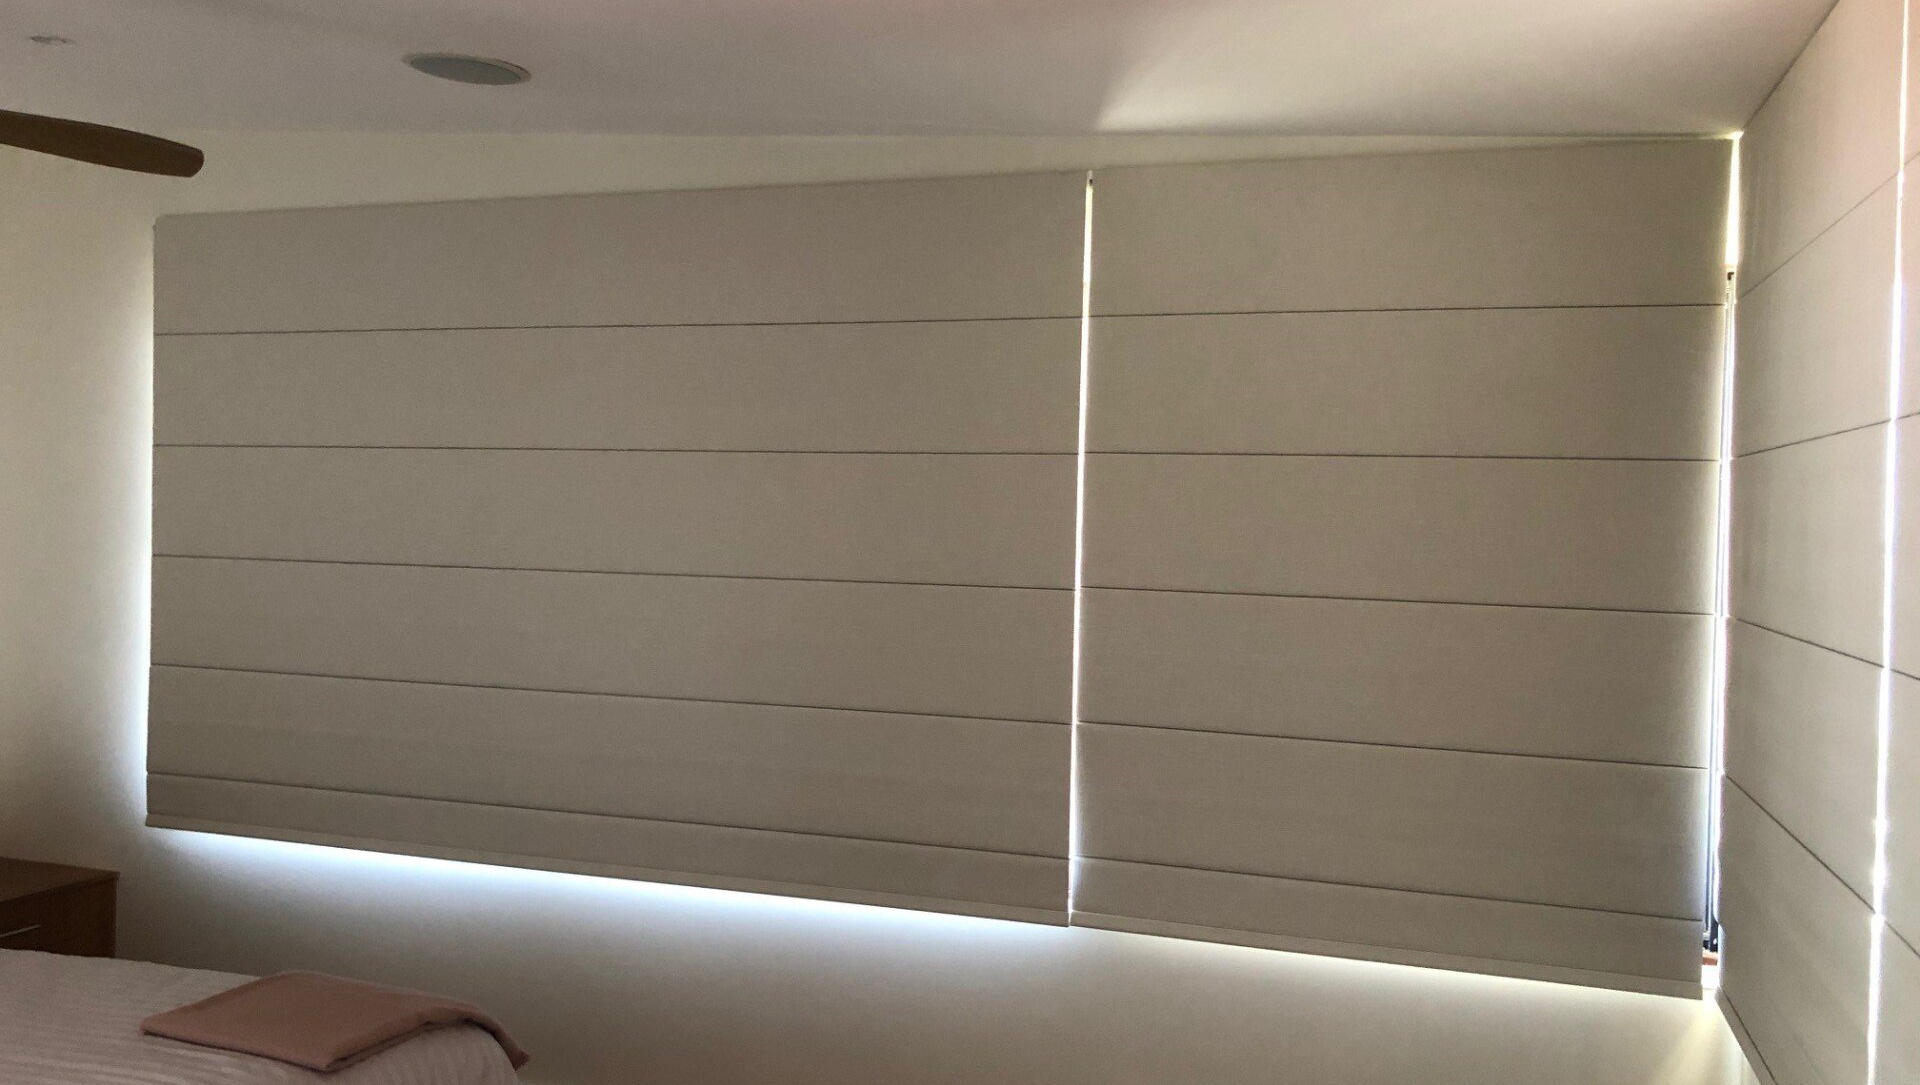 Roman Blinds in Townsville Home